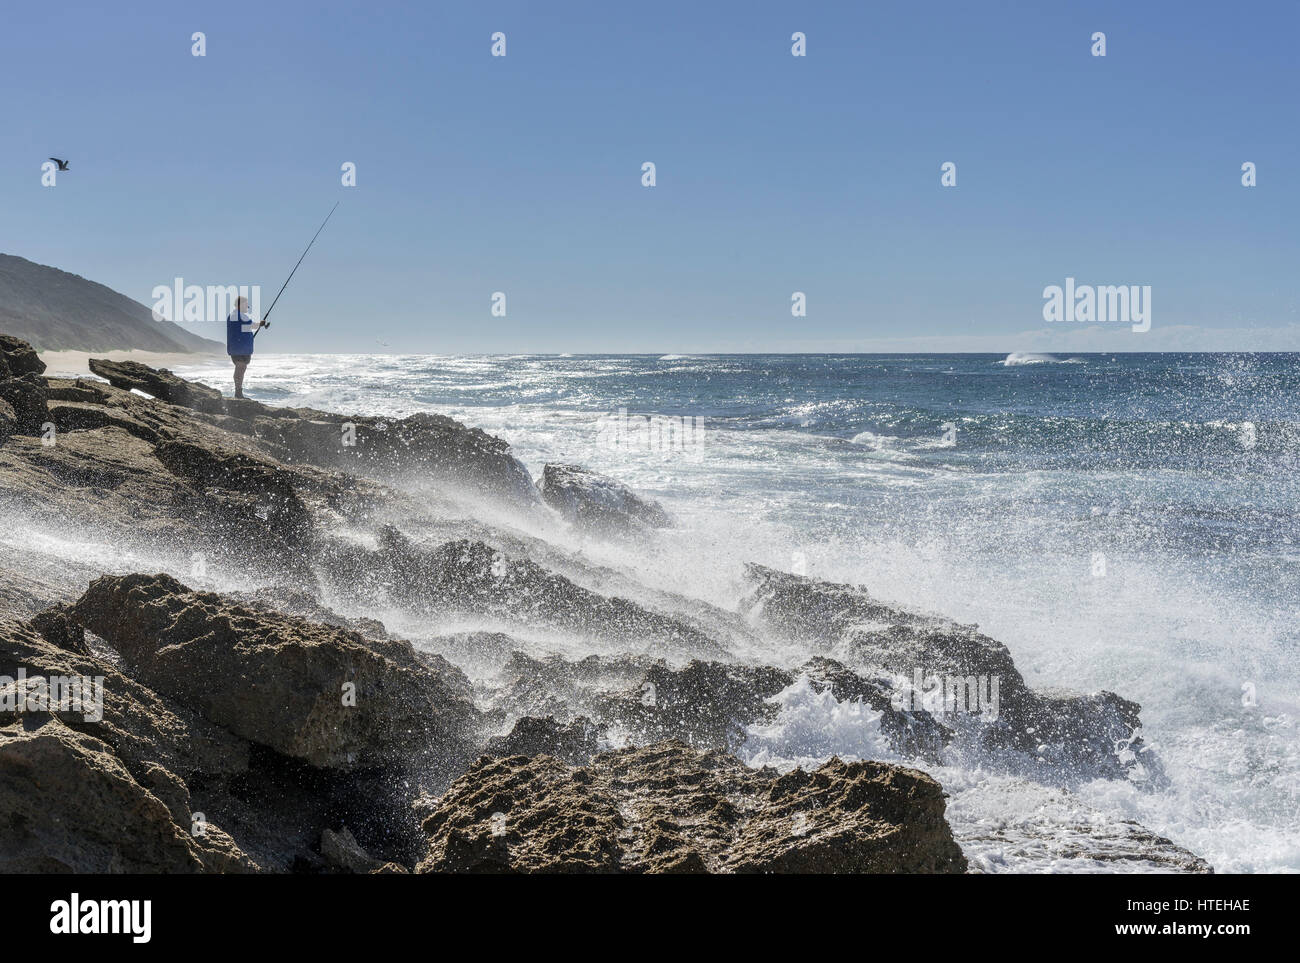 Angler standing on rocky coast with strong surf, iSimangaliso Wetland Park, KwaZulu-Natal, South Africa Stock Photo